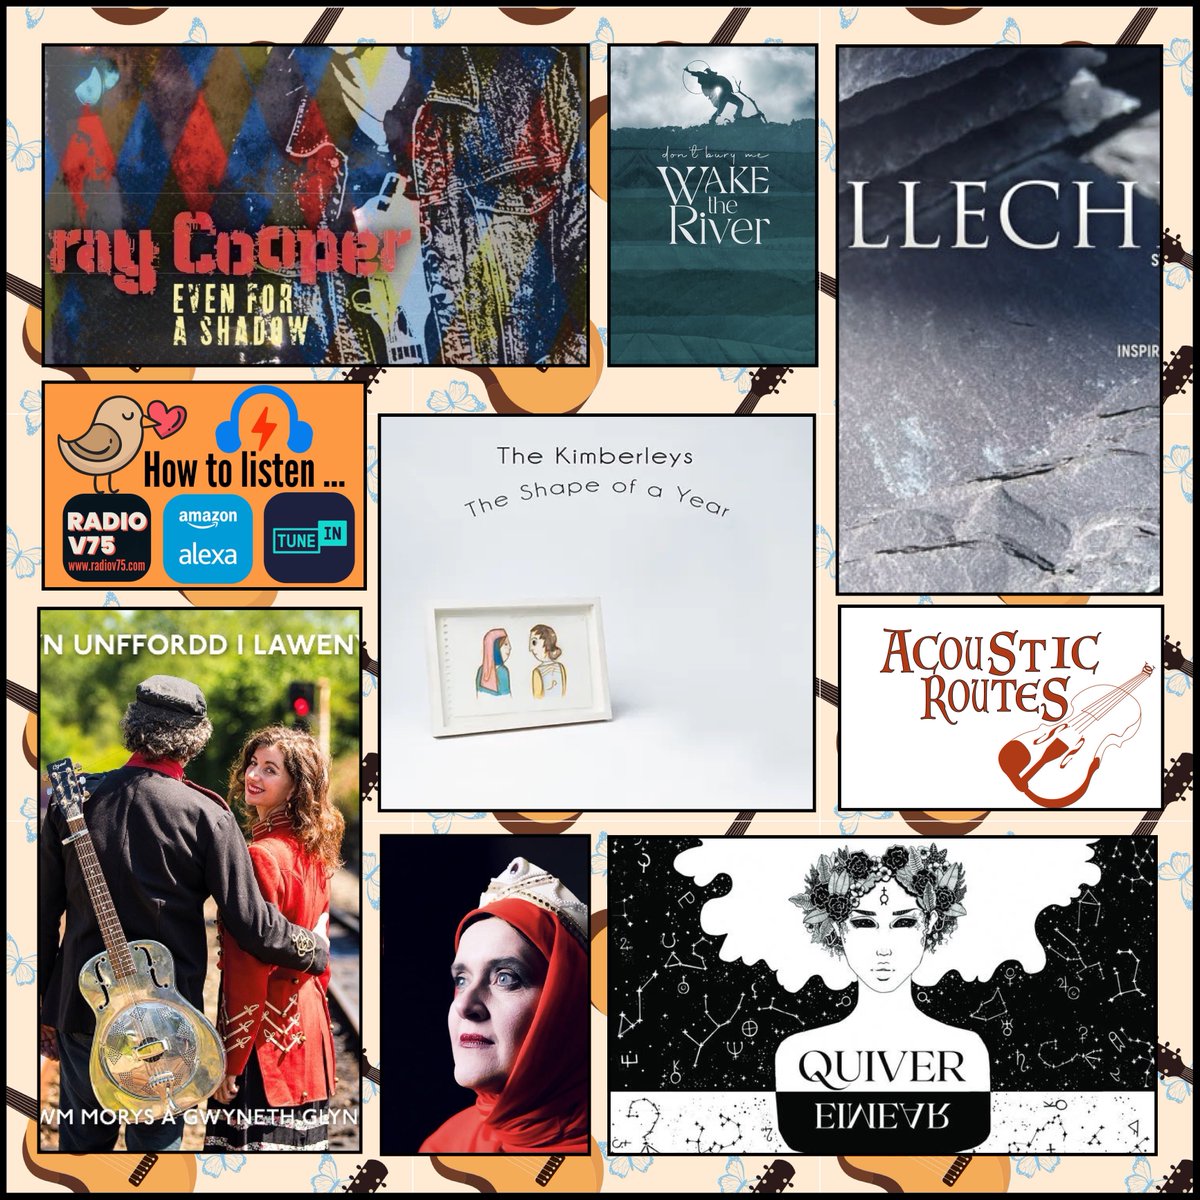 Coming up on @AcousticRoutes show 492, the featured album from @the_kimberleys & music from @twmtrefan a @GwynethGlyn @waketheriver @RaycooperRay @FoxbridgeMusic @StateofUndress @DariaKulesh and @johnacalun Tune in to radiov75.com Weds 7pm 🏴󠁧󠁢󠁷󠁬󠁳󠁿🇬🇧 time